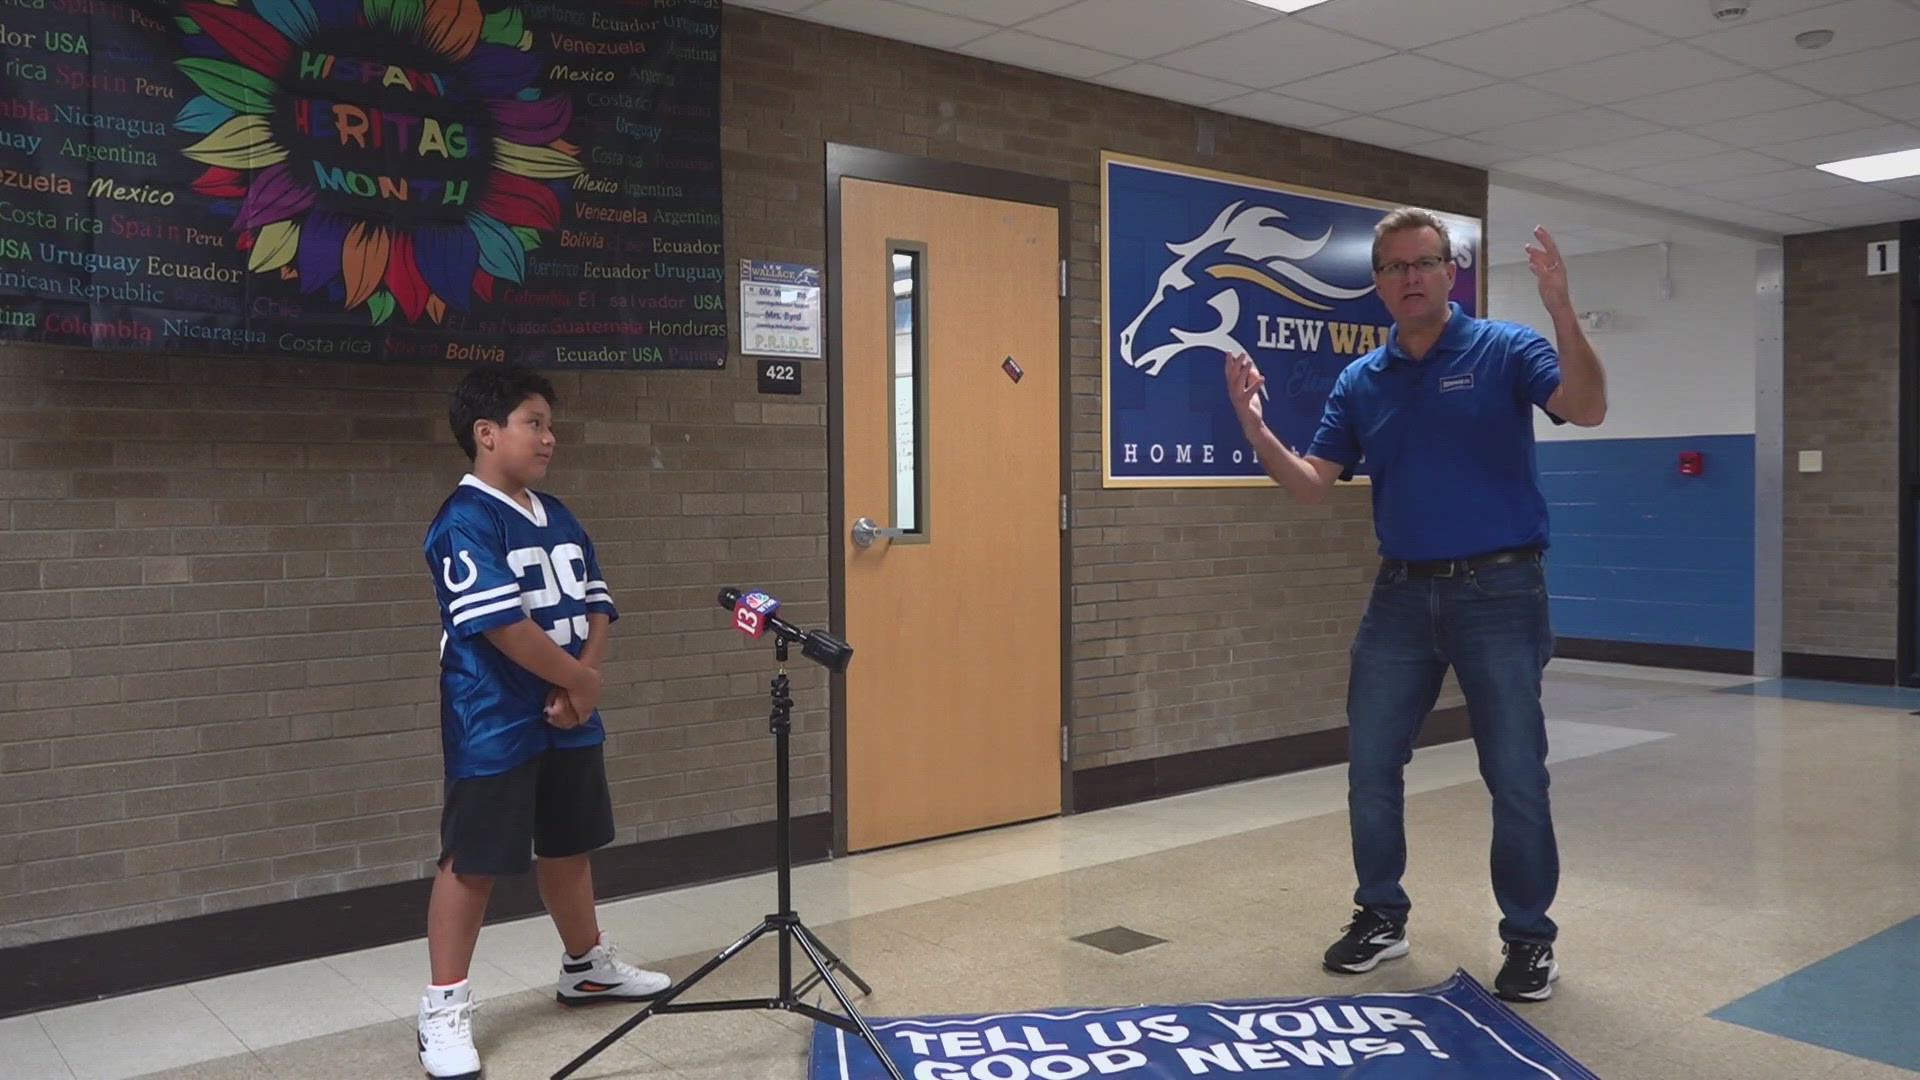 Good News with Dave Calabro takes him to Indianapolis Public School 107 where he asks students to tell him their Good News.